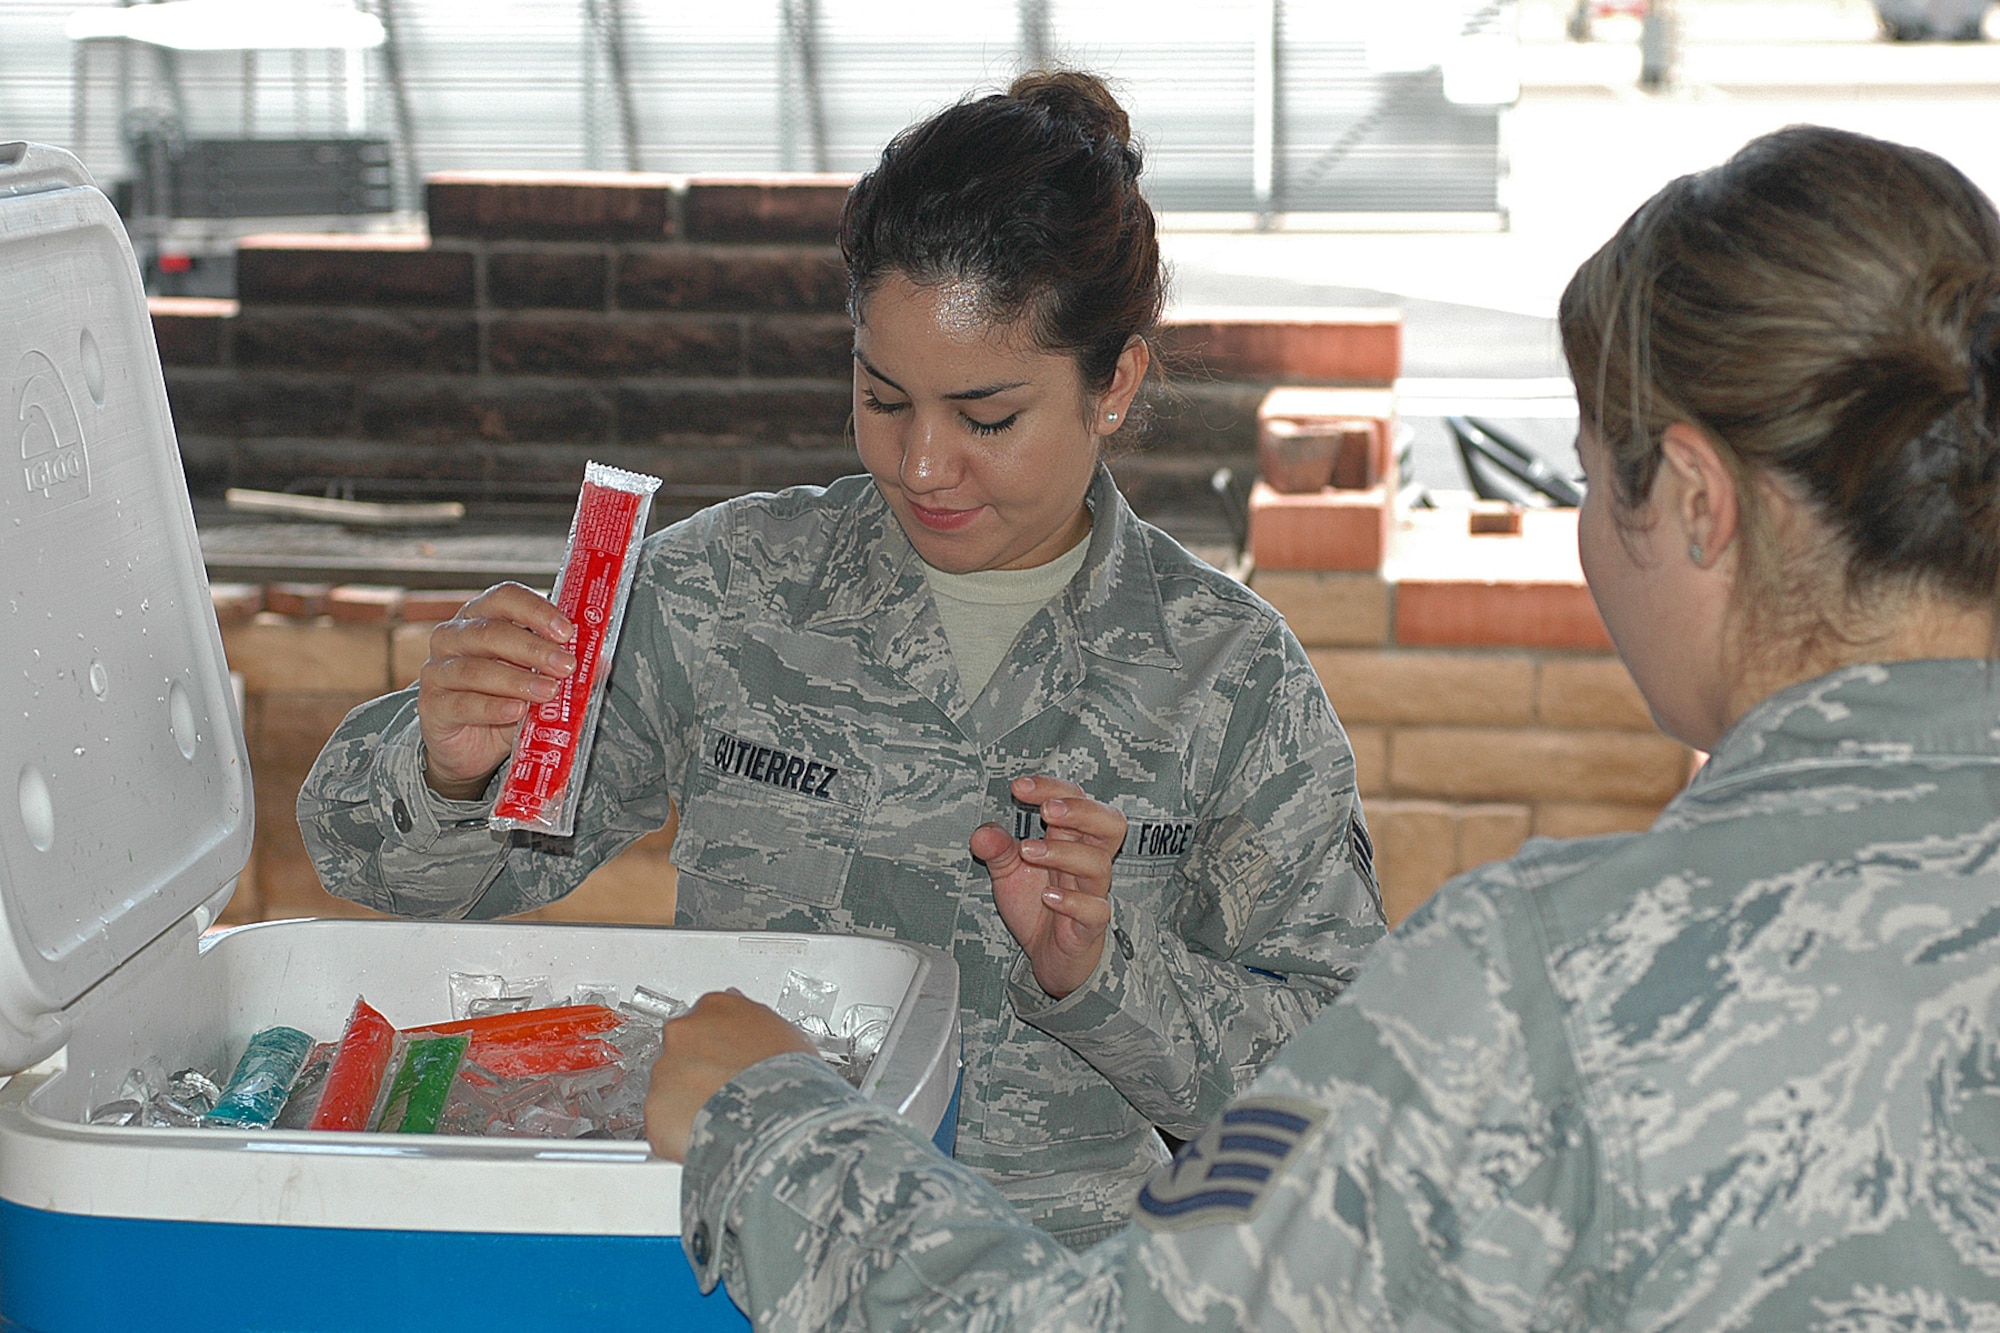 Senior Airman Iana Gutierrez accepts a frozen popsicle from Staff Sgt. Charmaine Pozo, secretary, Junior Enlisted Council, July 8. The frozen treats boosted moral for wing members working in the 100 degree Tucson heat. (U.S. Air Force photo/Staff Sgt. Jordan Jones)
